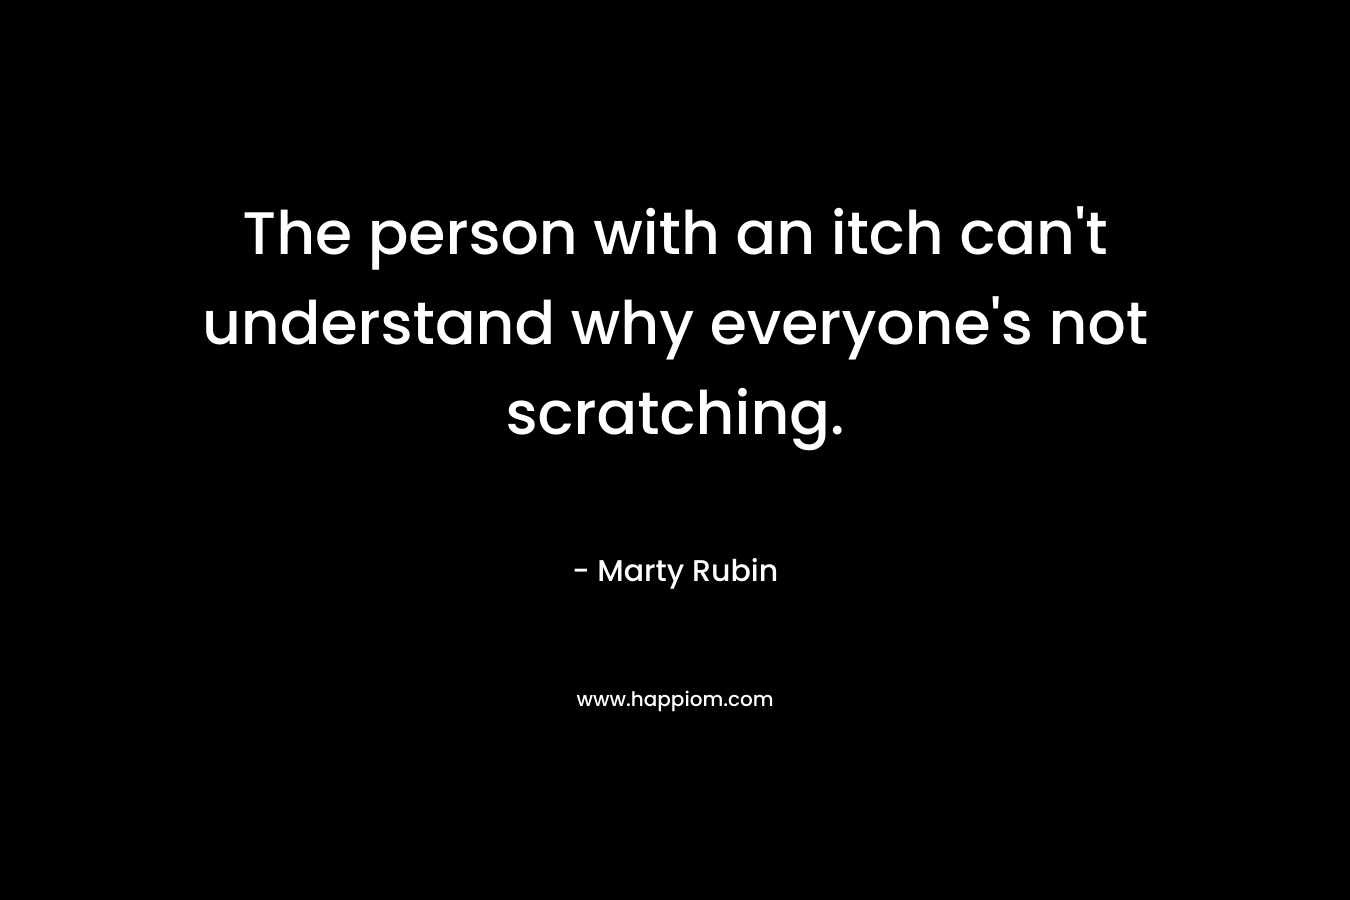 The person with an itch can’t understand why everyone’s not scratching. – Marty Rubin